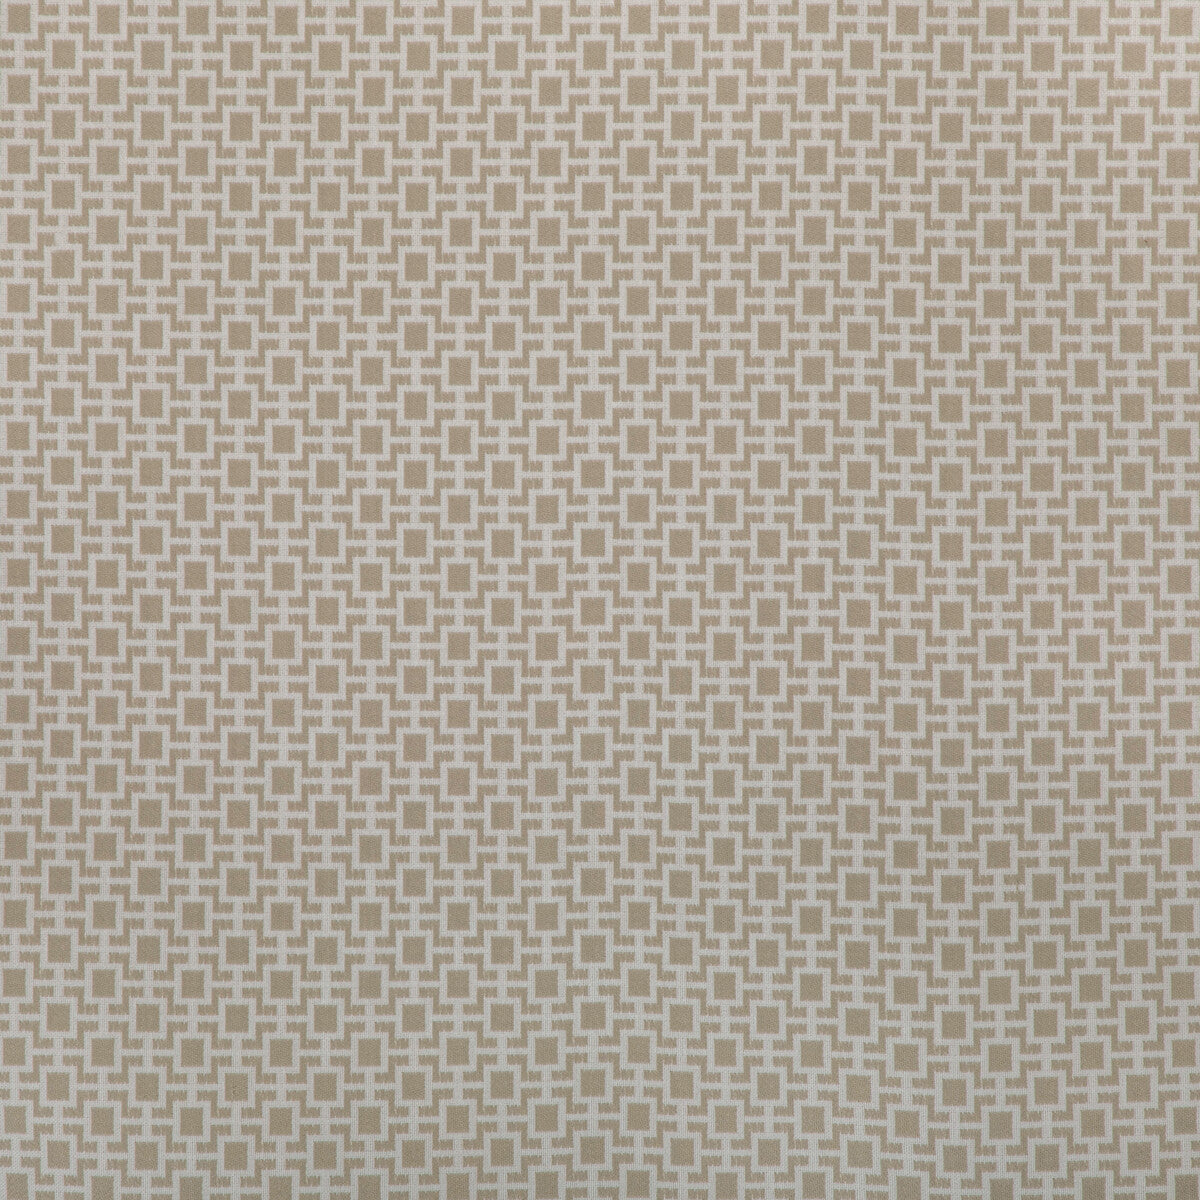 Kravet Design fabric in 36875-16 color - pattern 36875.16.0 - by Kravet Design in the Insideout Seaqual Initiative collection